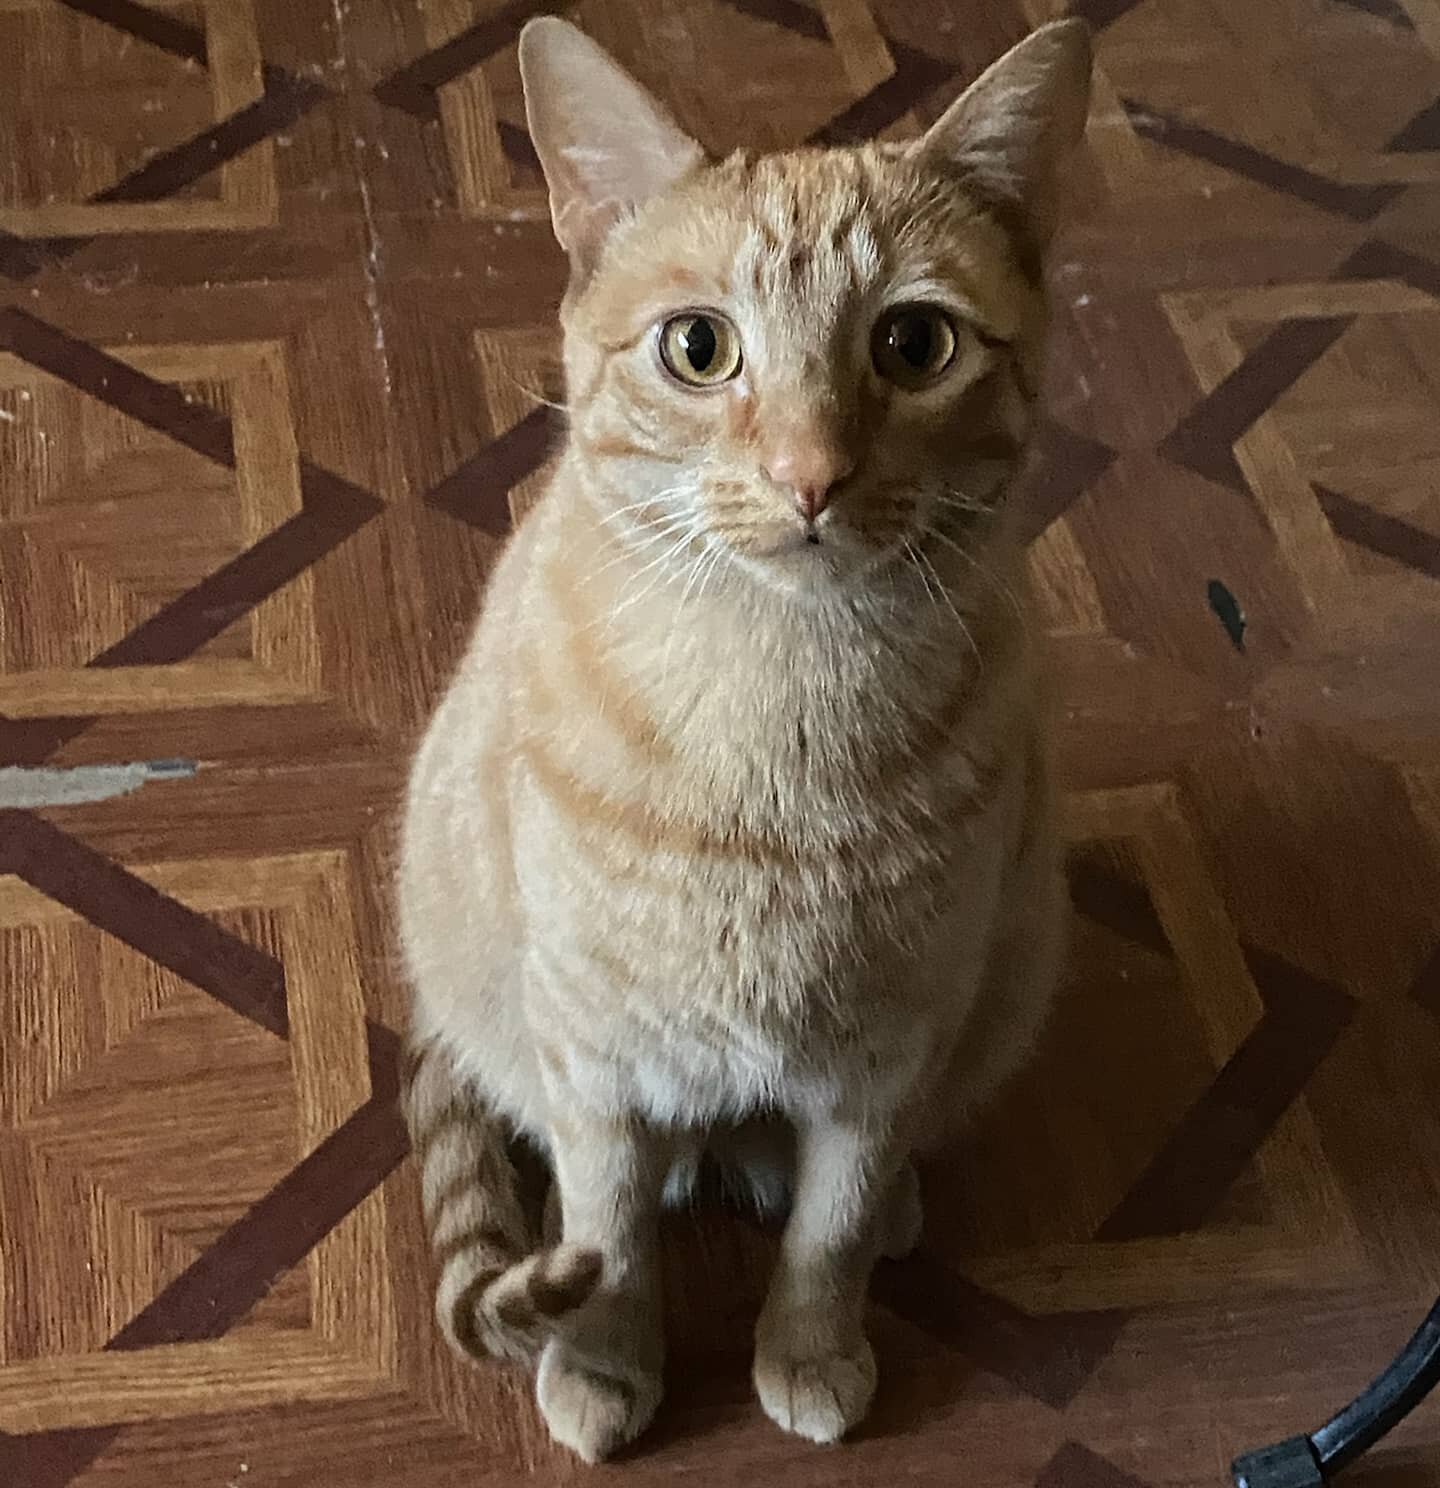 Meet Mico! An energetic young orange tabby in need of a foster home! We have gotten many potential fosters interested but none that have followed through. 

Mico needs a cat friendly home with enough space to jump, climb and play. He's the type of ca